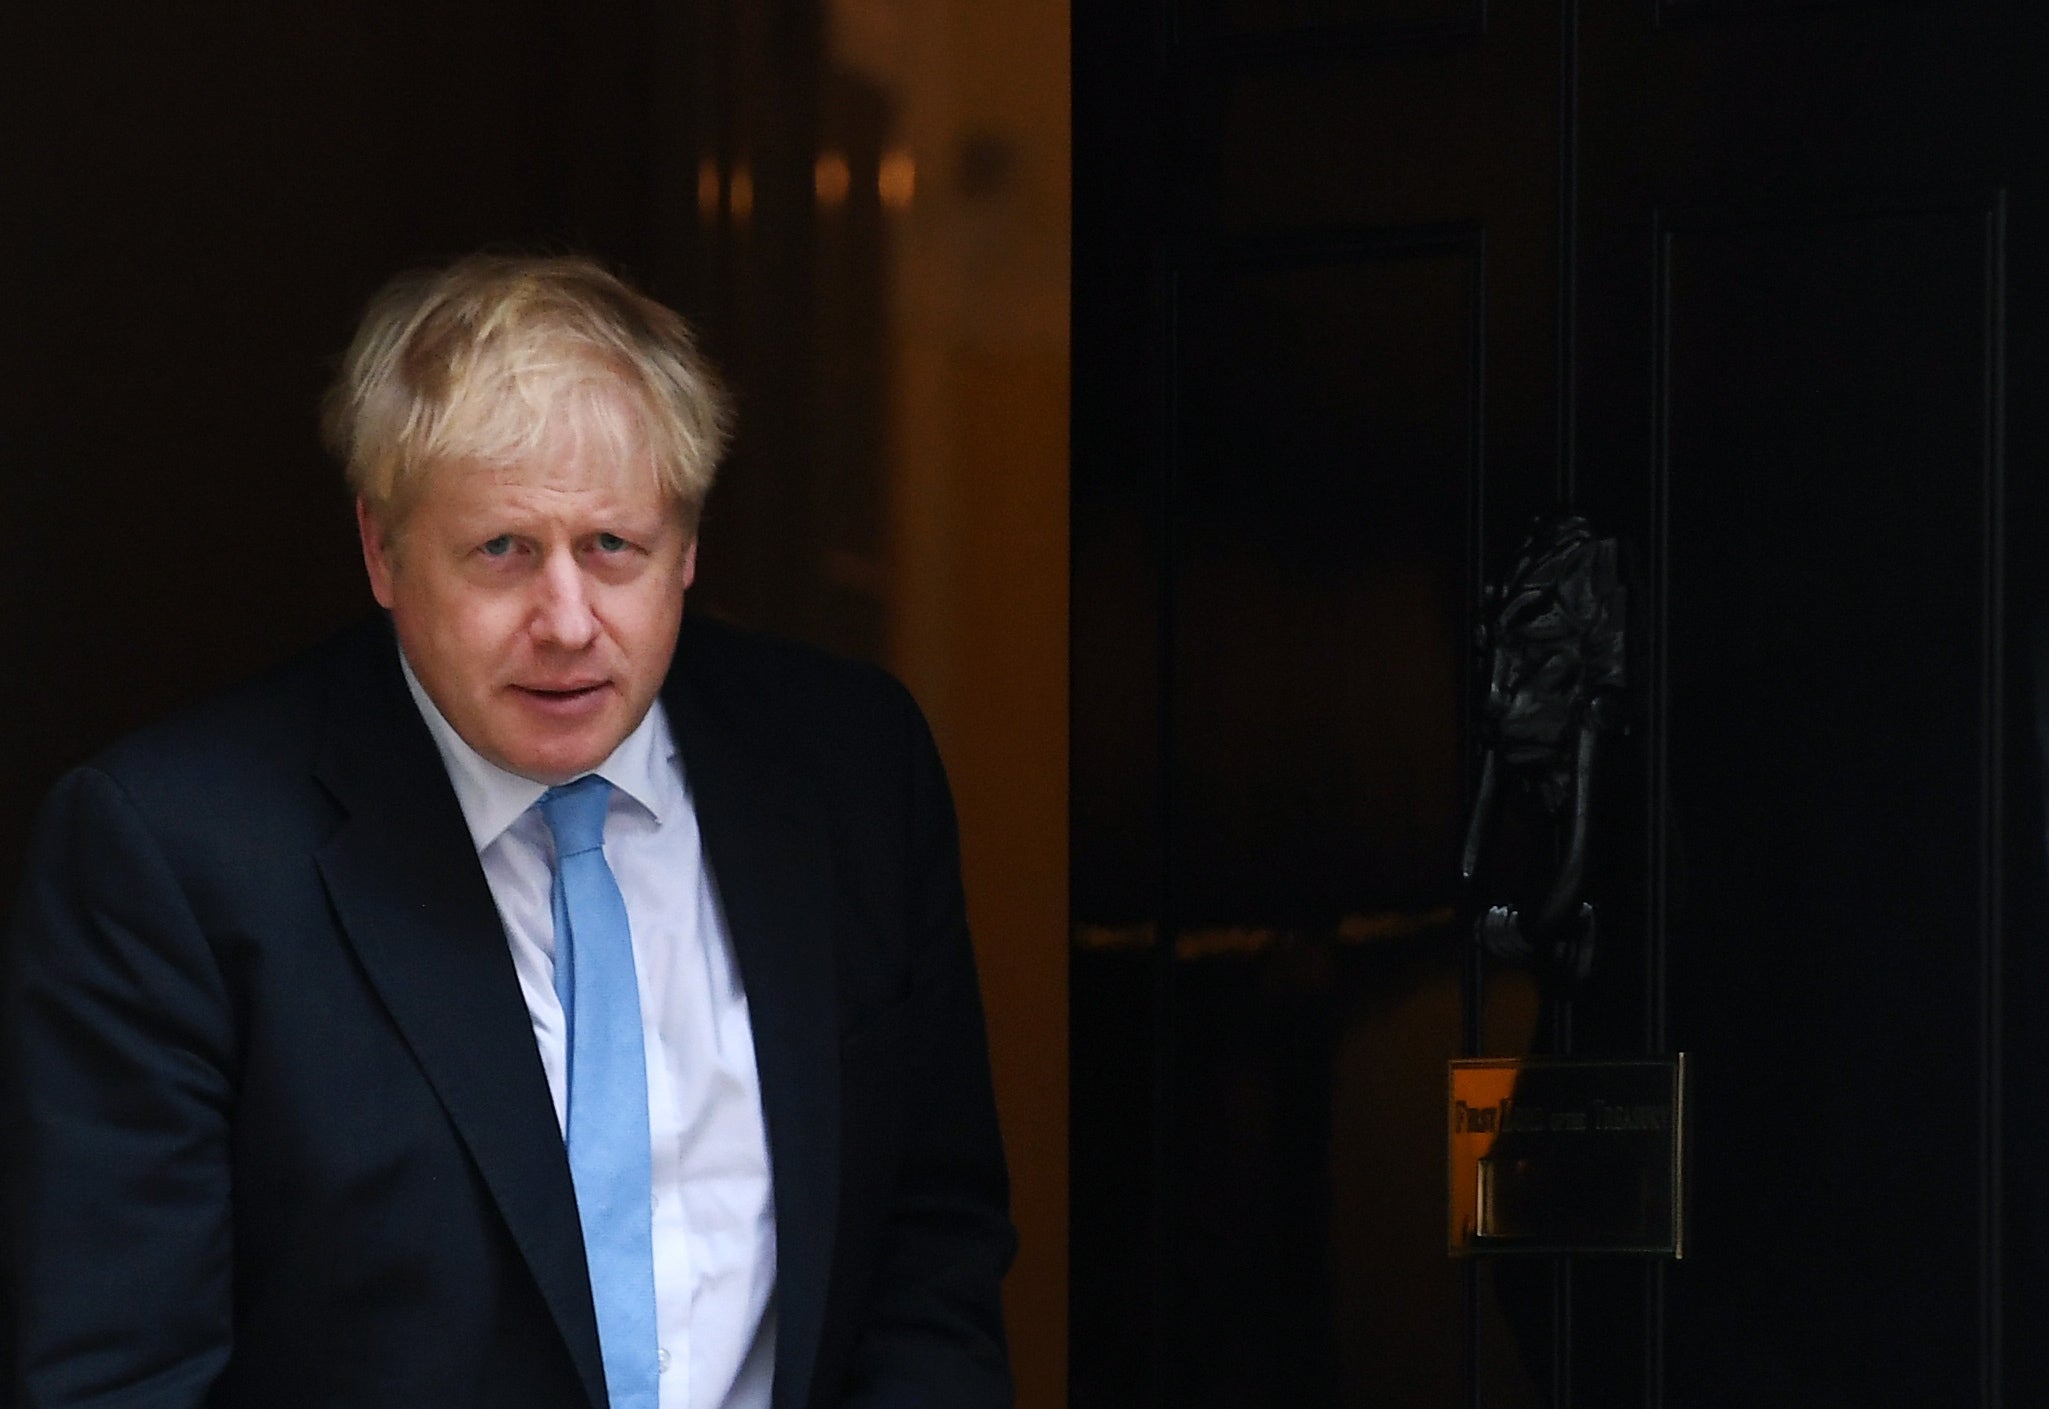 formal ... to Boris too get for Johnson countries say EU late